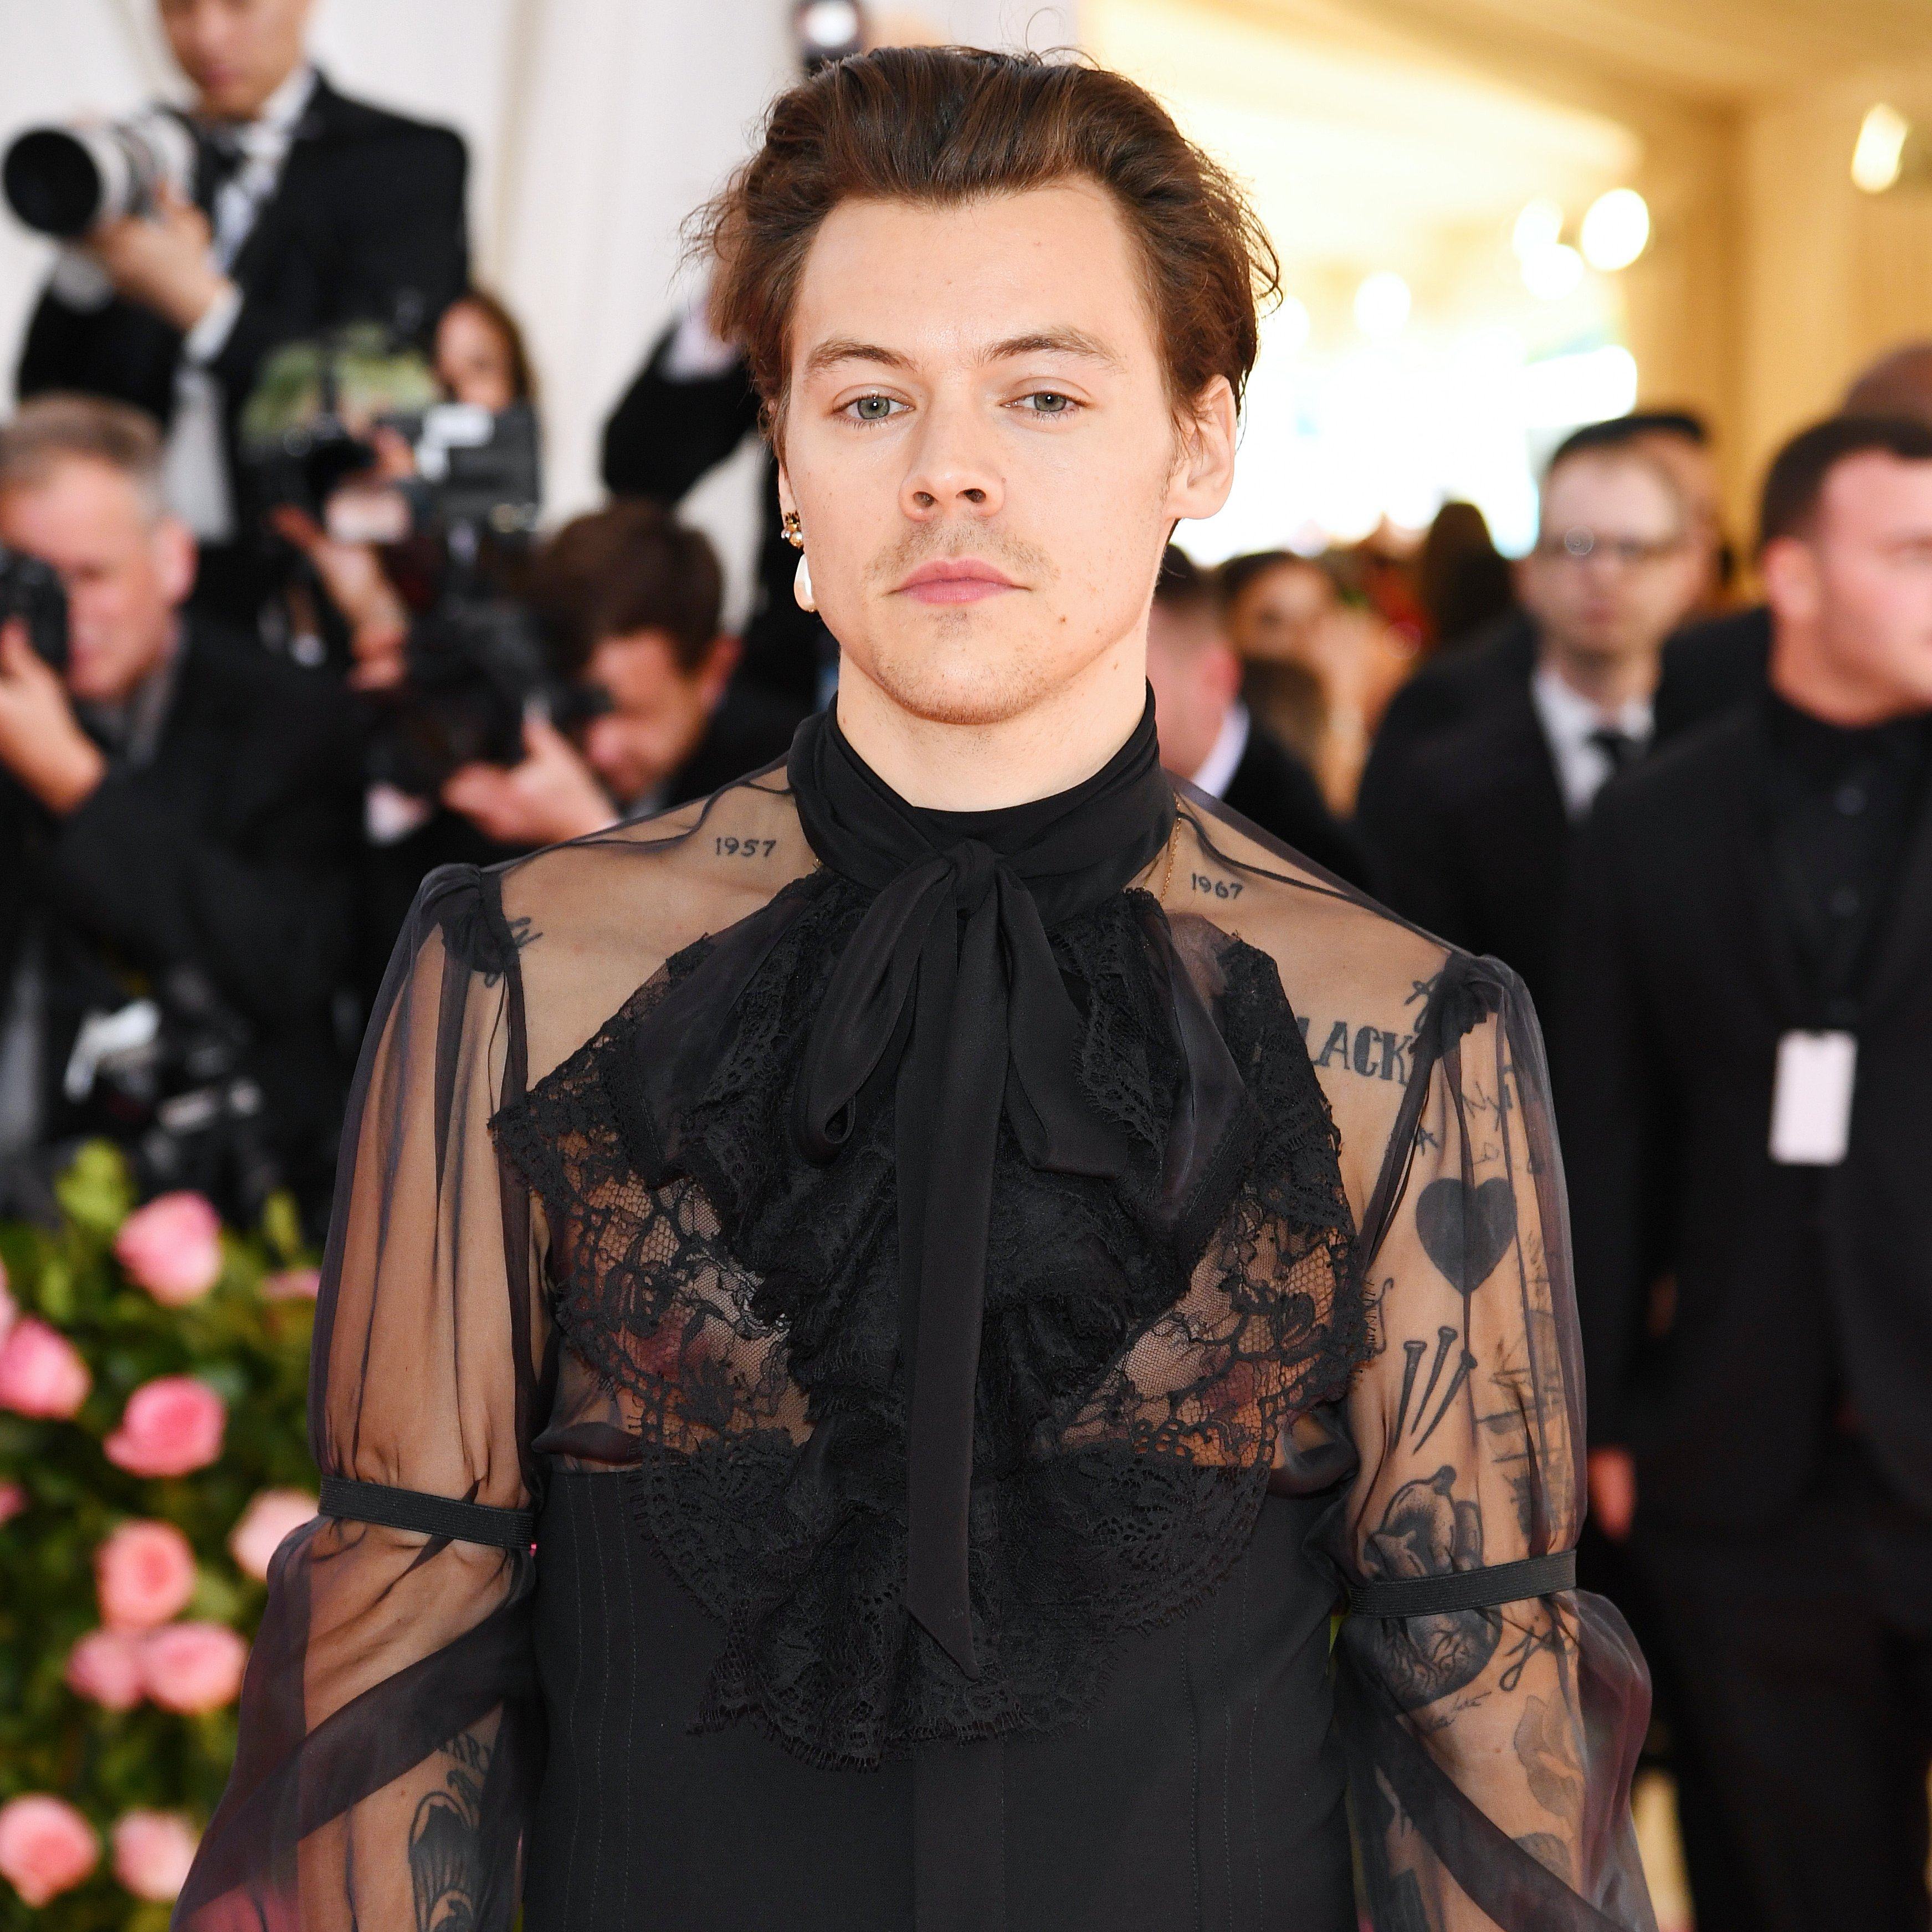 13 revelations from Harry Styles about his sexuality and gender